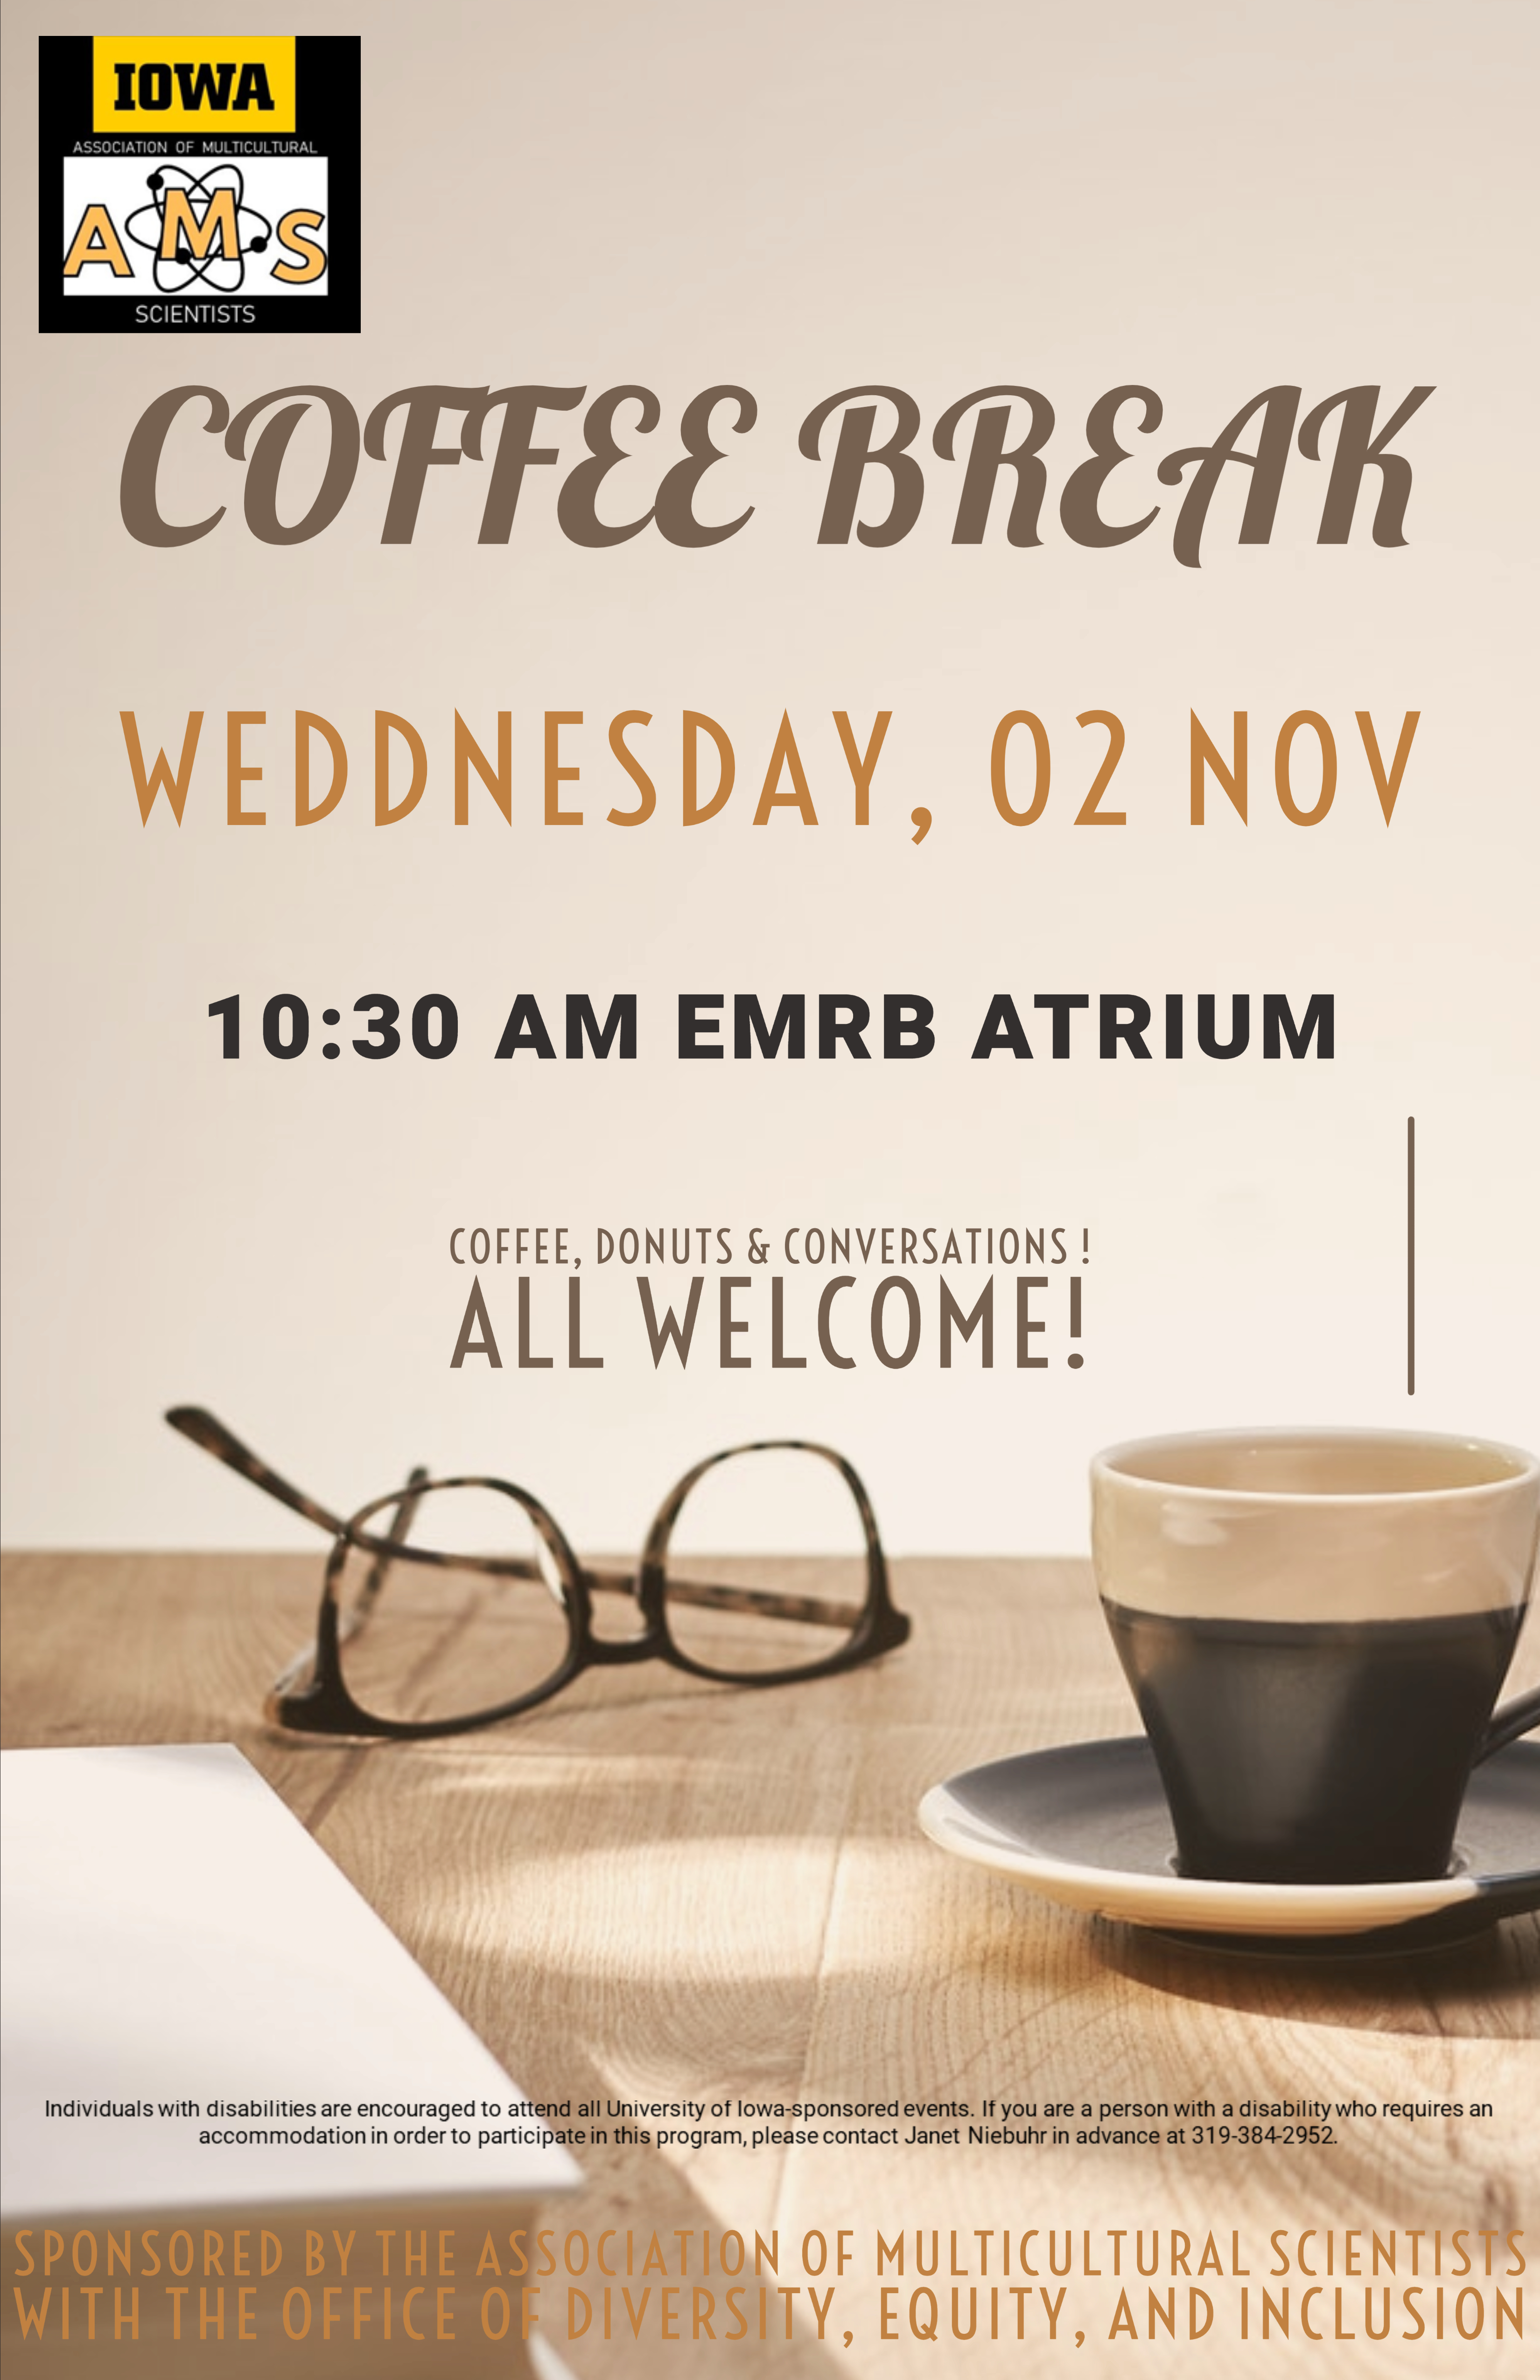 Association of Multicultural Scientists welcomes all for coffee break hour every other Wednesday in EMRB atrium